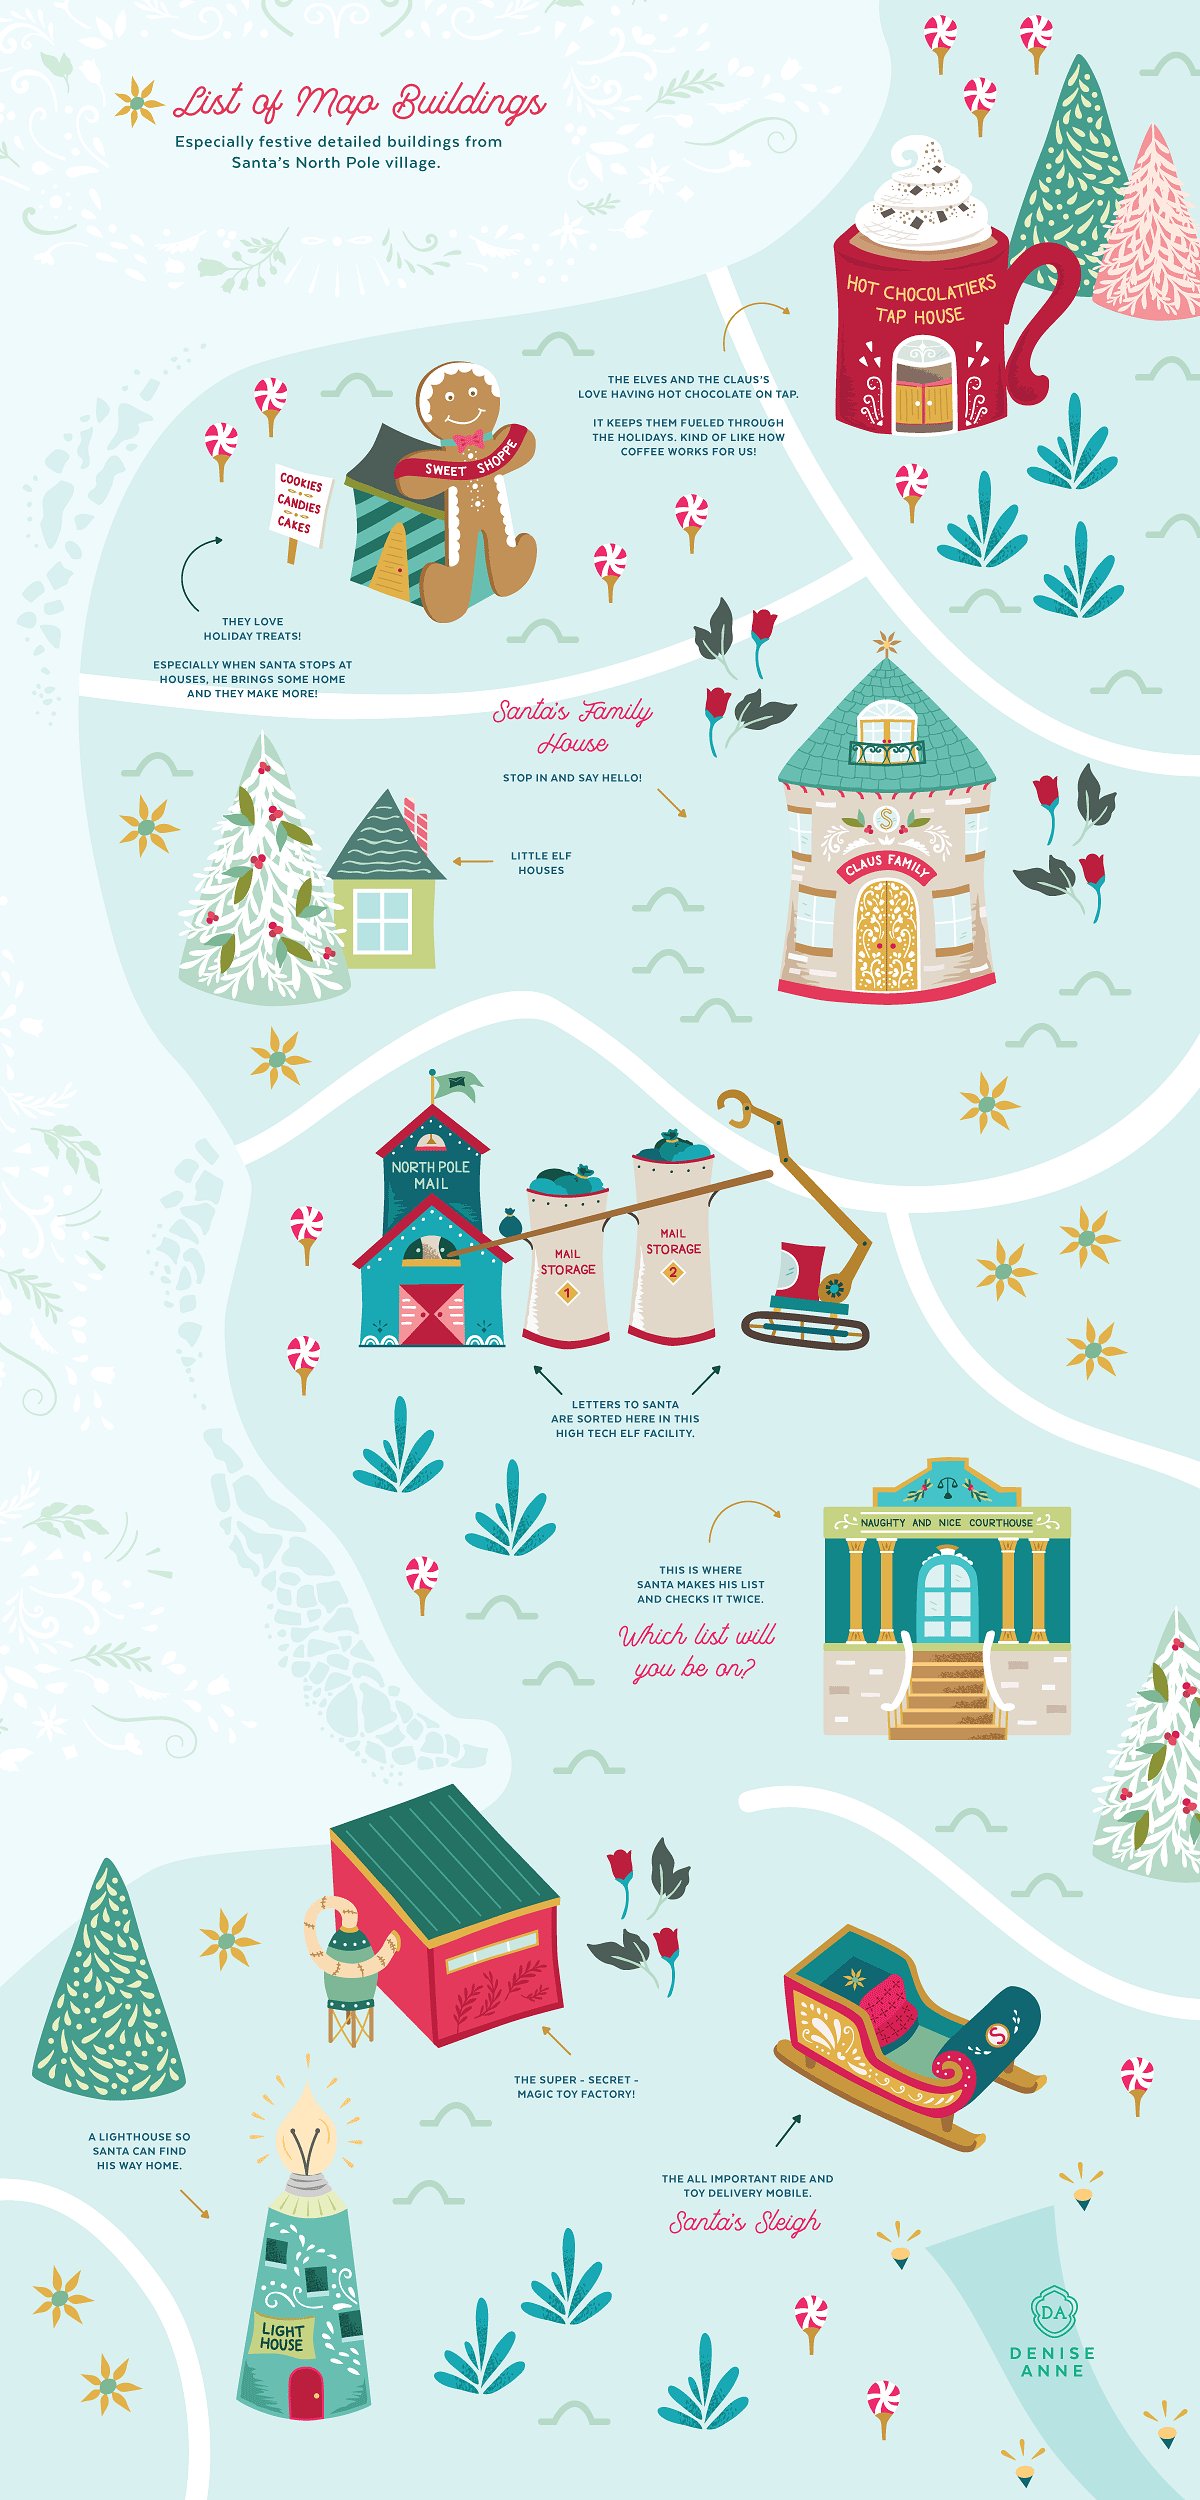 Santa's North Christmas map of the village including buildings and other illustrations